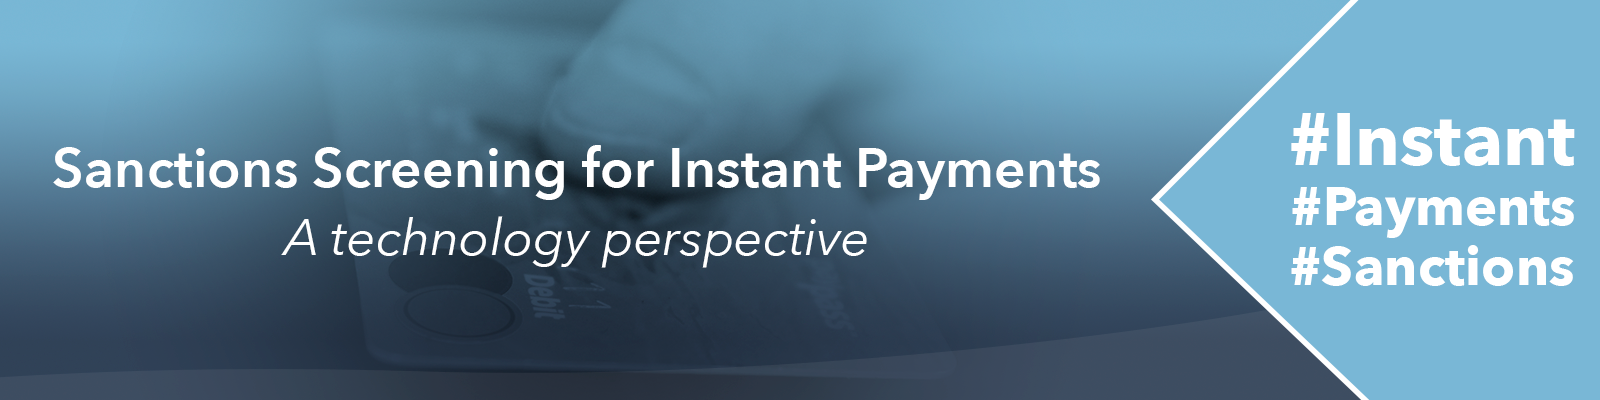 Sanctions Screening for Instant Payments – A technology perspective